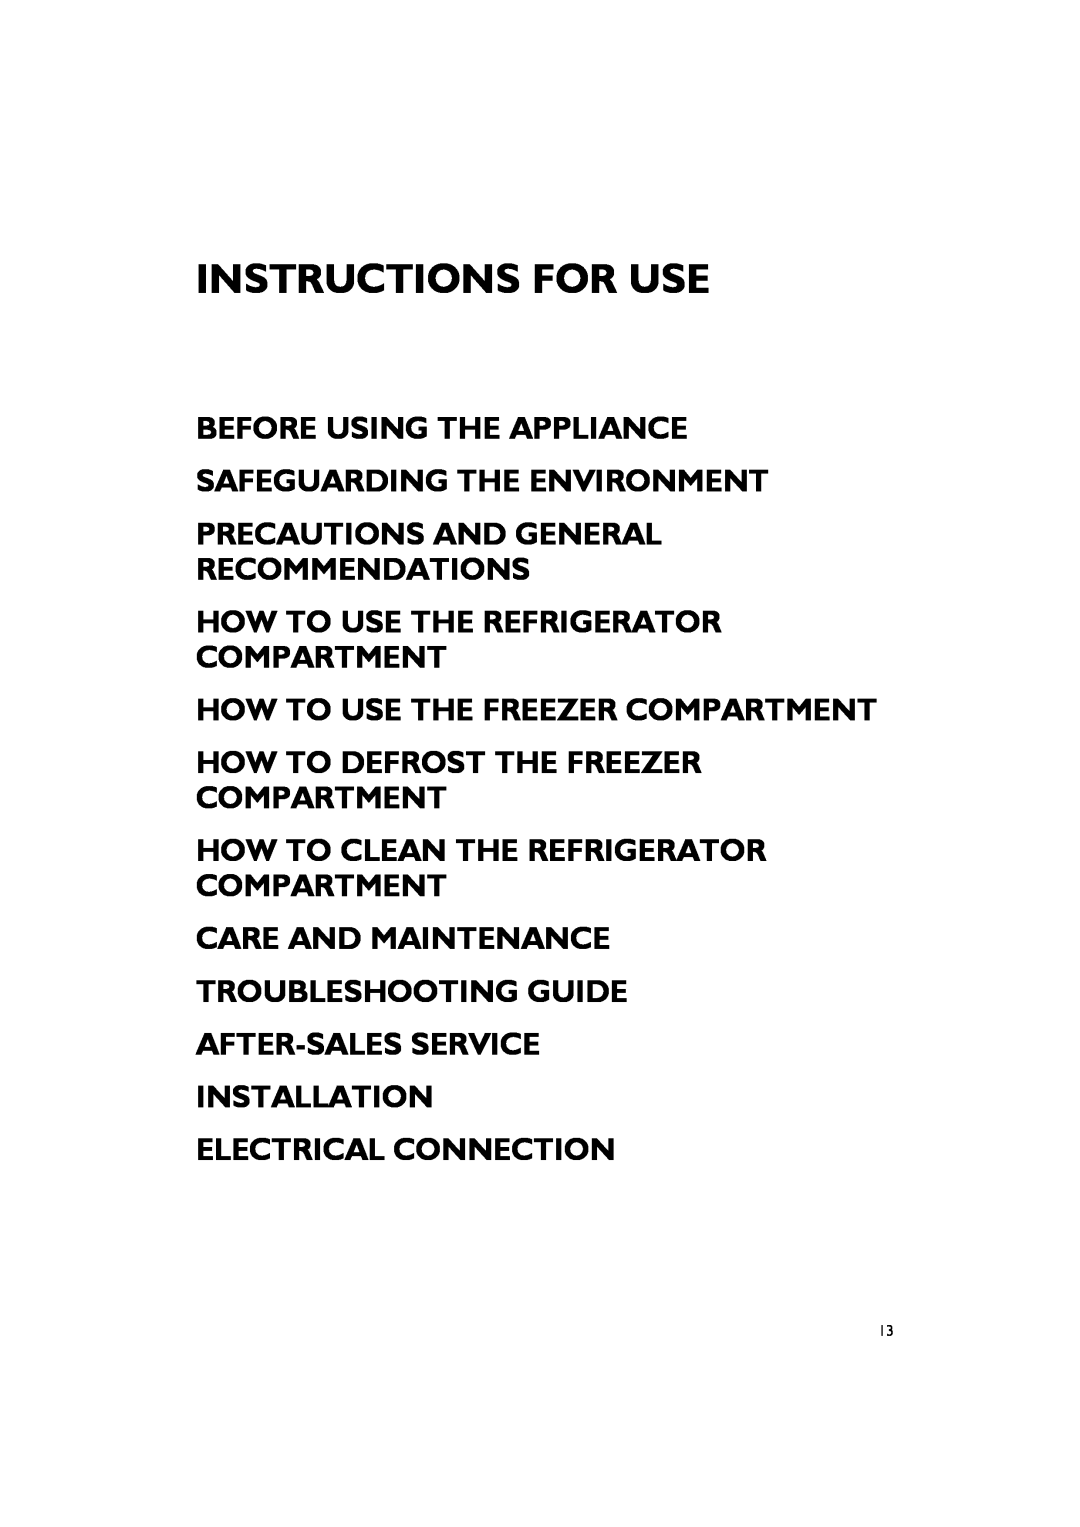 Smeg CR324ASX7, CR324A7 manual Precautions And General Recommendations, How To Use The Refrigerator Compartment 